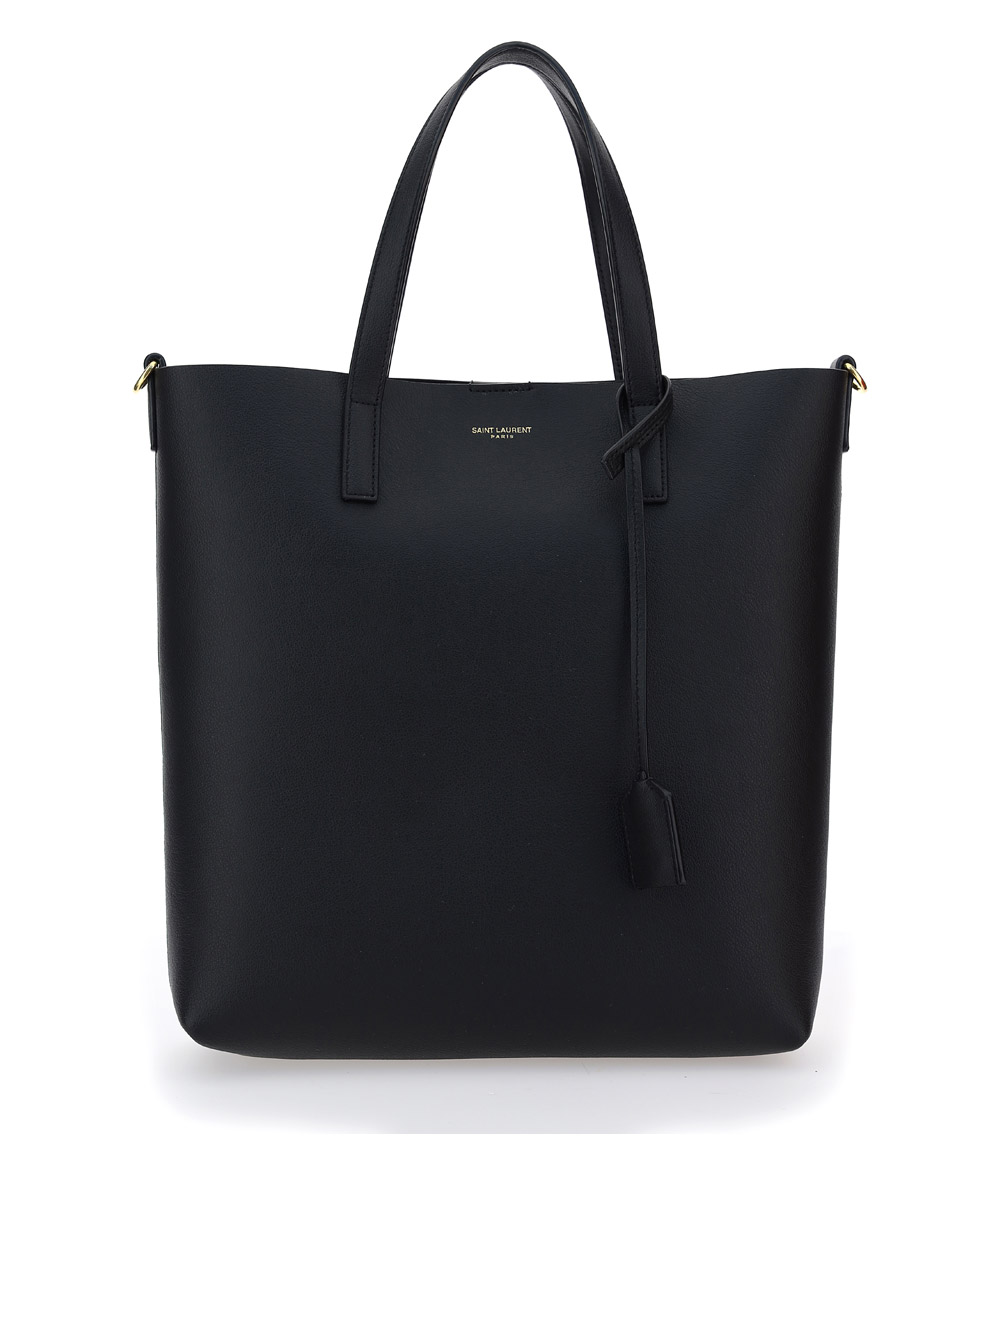 Saint Laurent Leather Shopping Bag in Gray